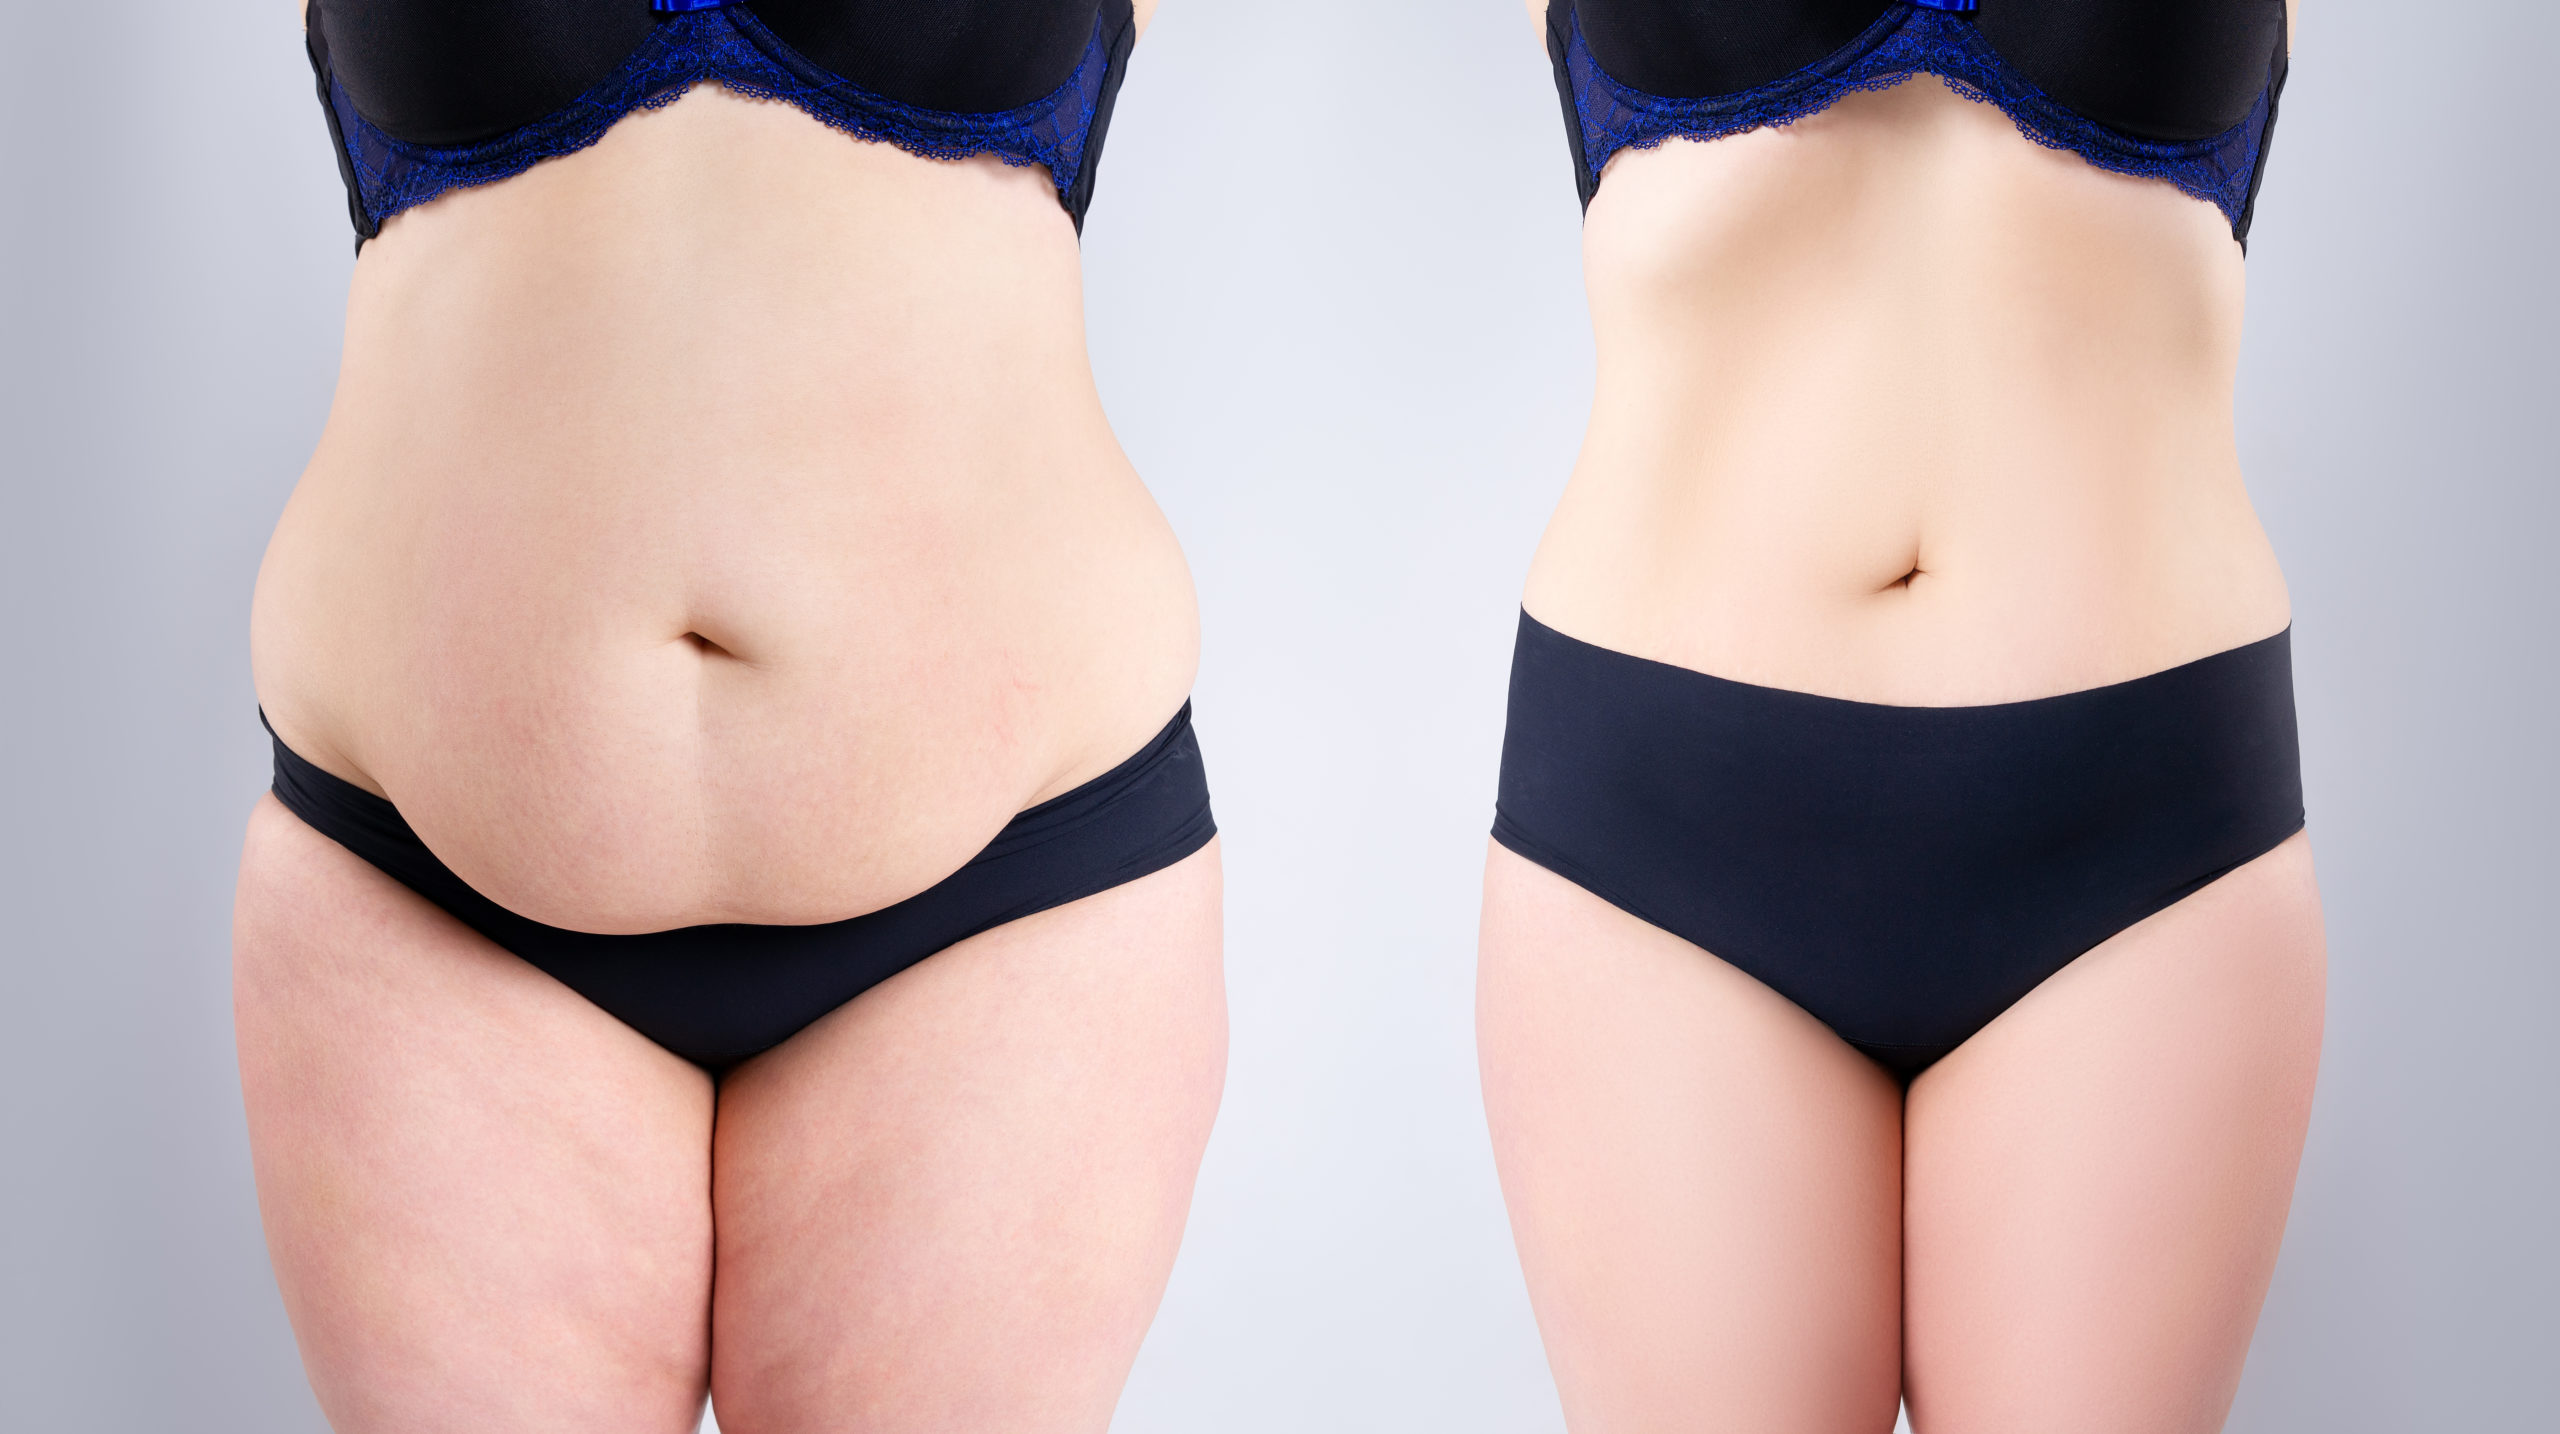 What Are the Side Effects of Tummy Tuck Surgery?